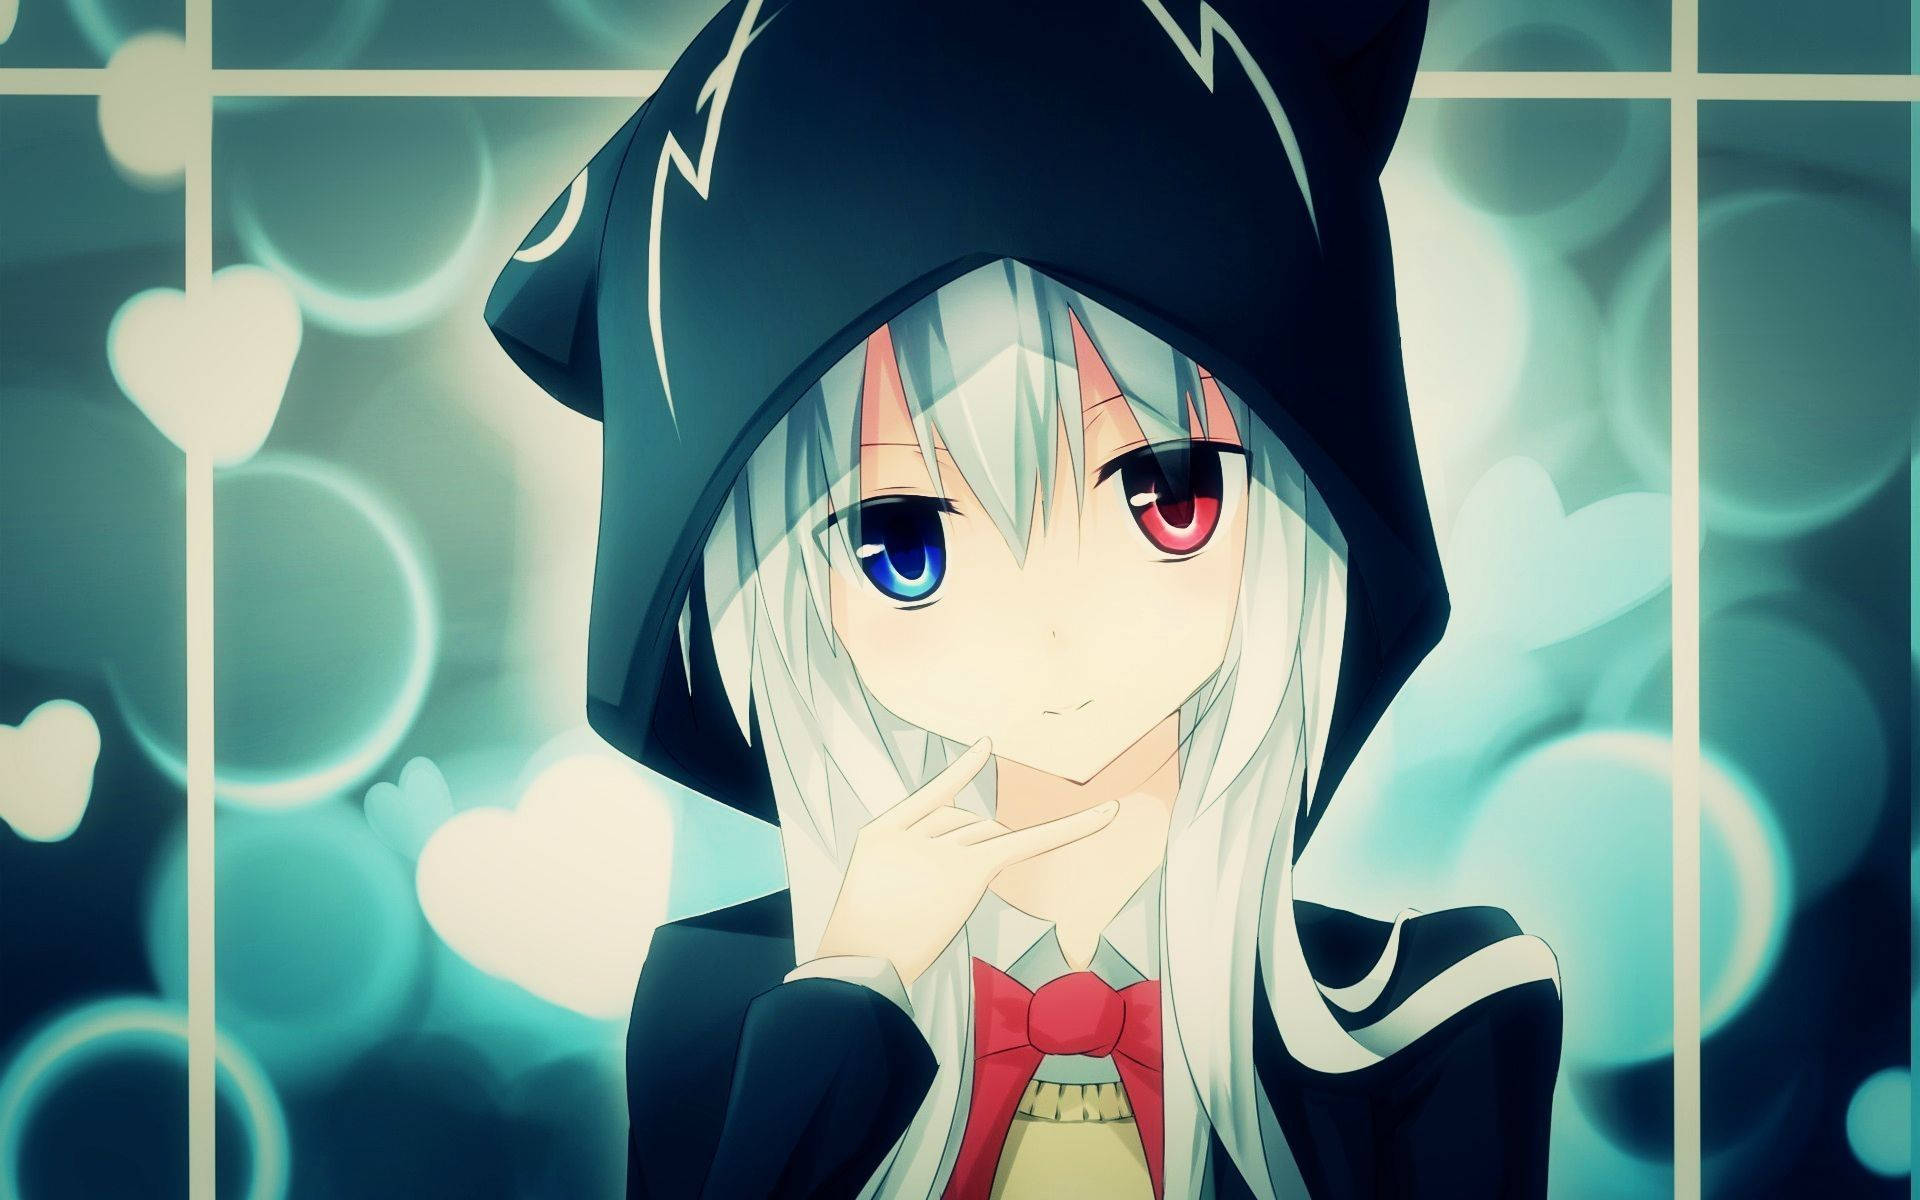 Red & Blue-eyed Anime Girl Hoodie Picture